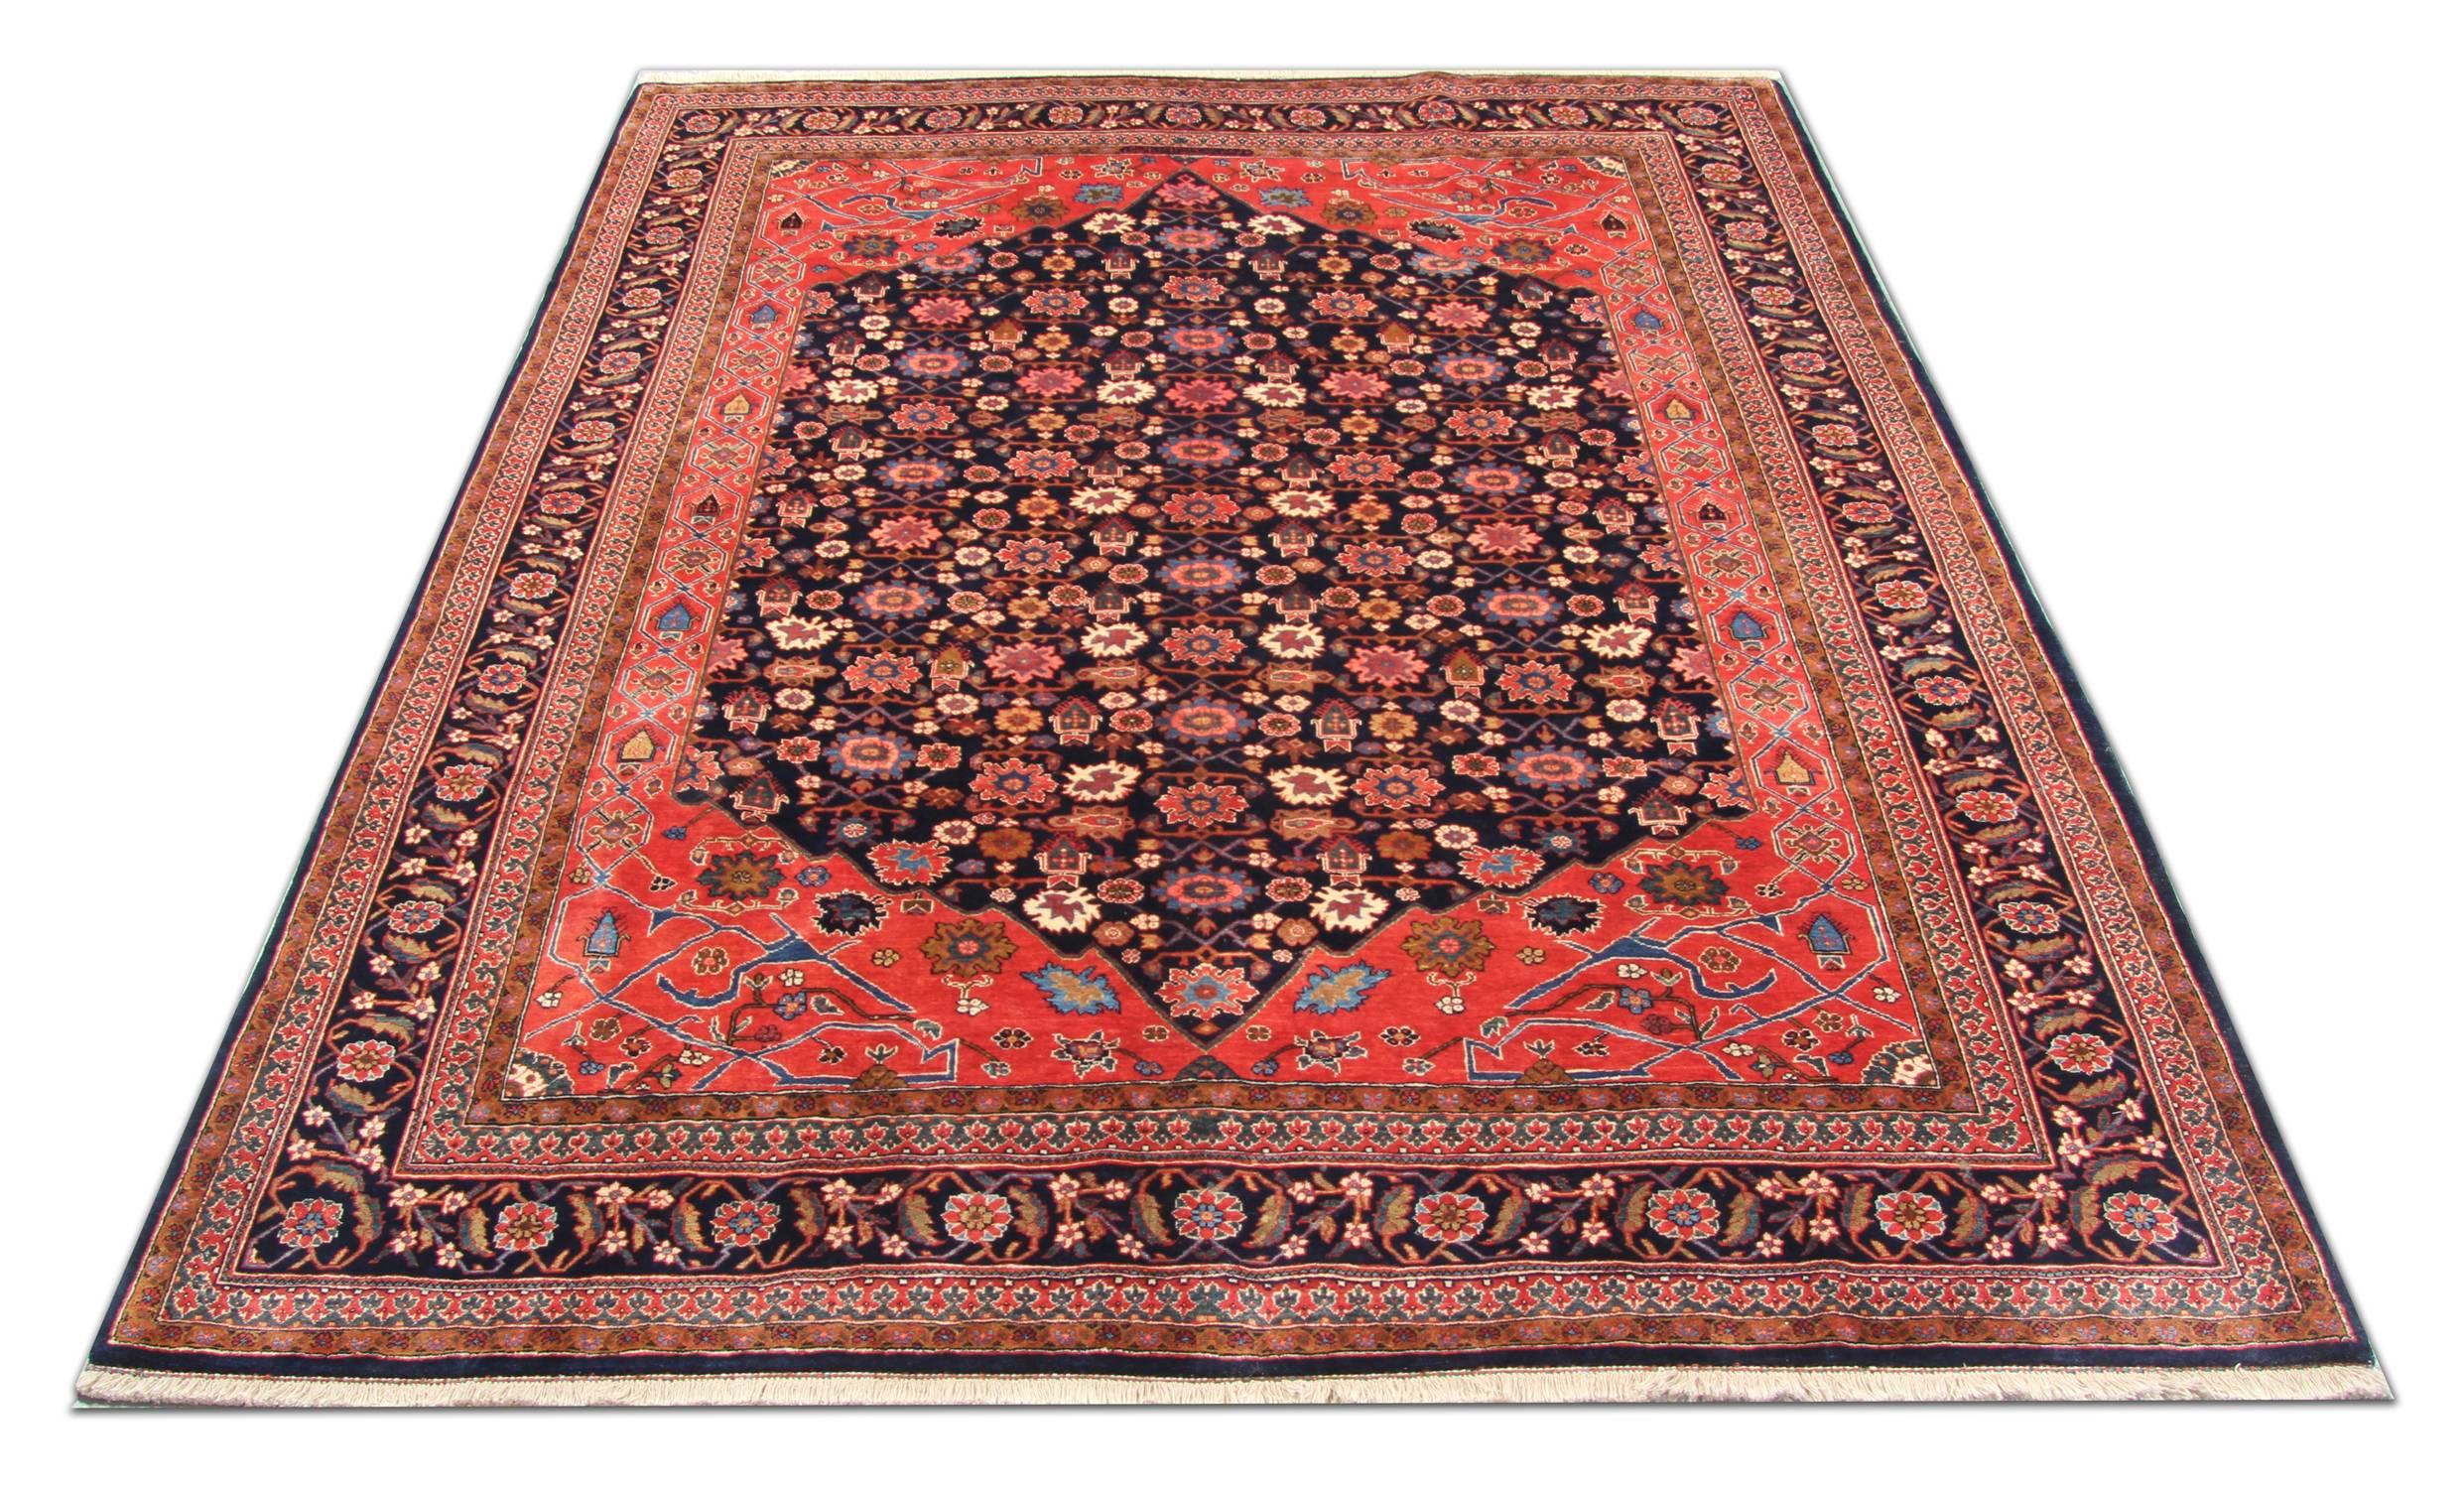 This highly-decorative wool rug has been woven with a fantastic central design woven on dark background in accents of pink, blue and orange. An intricate repeat pattern border encloses the central design. Layered with detail, this beautiful wool